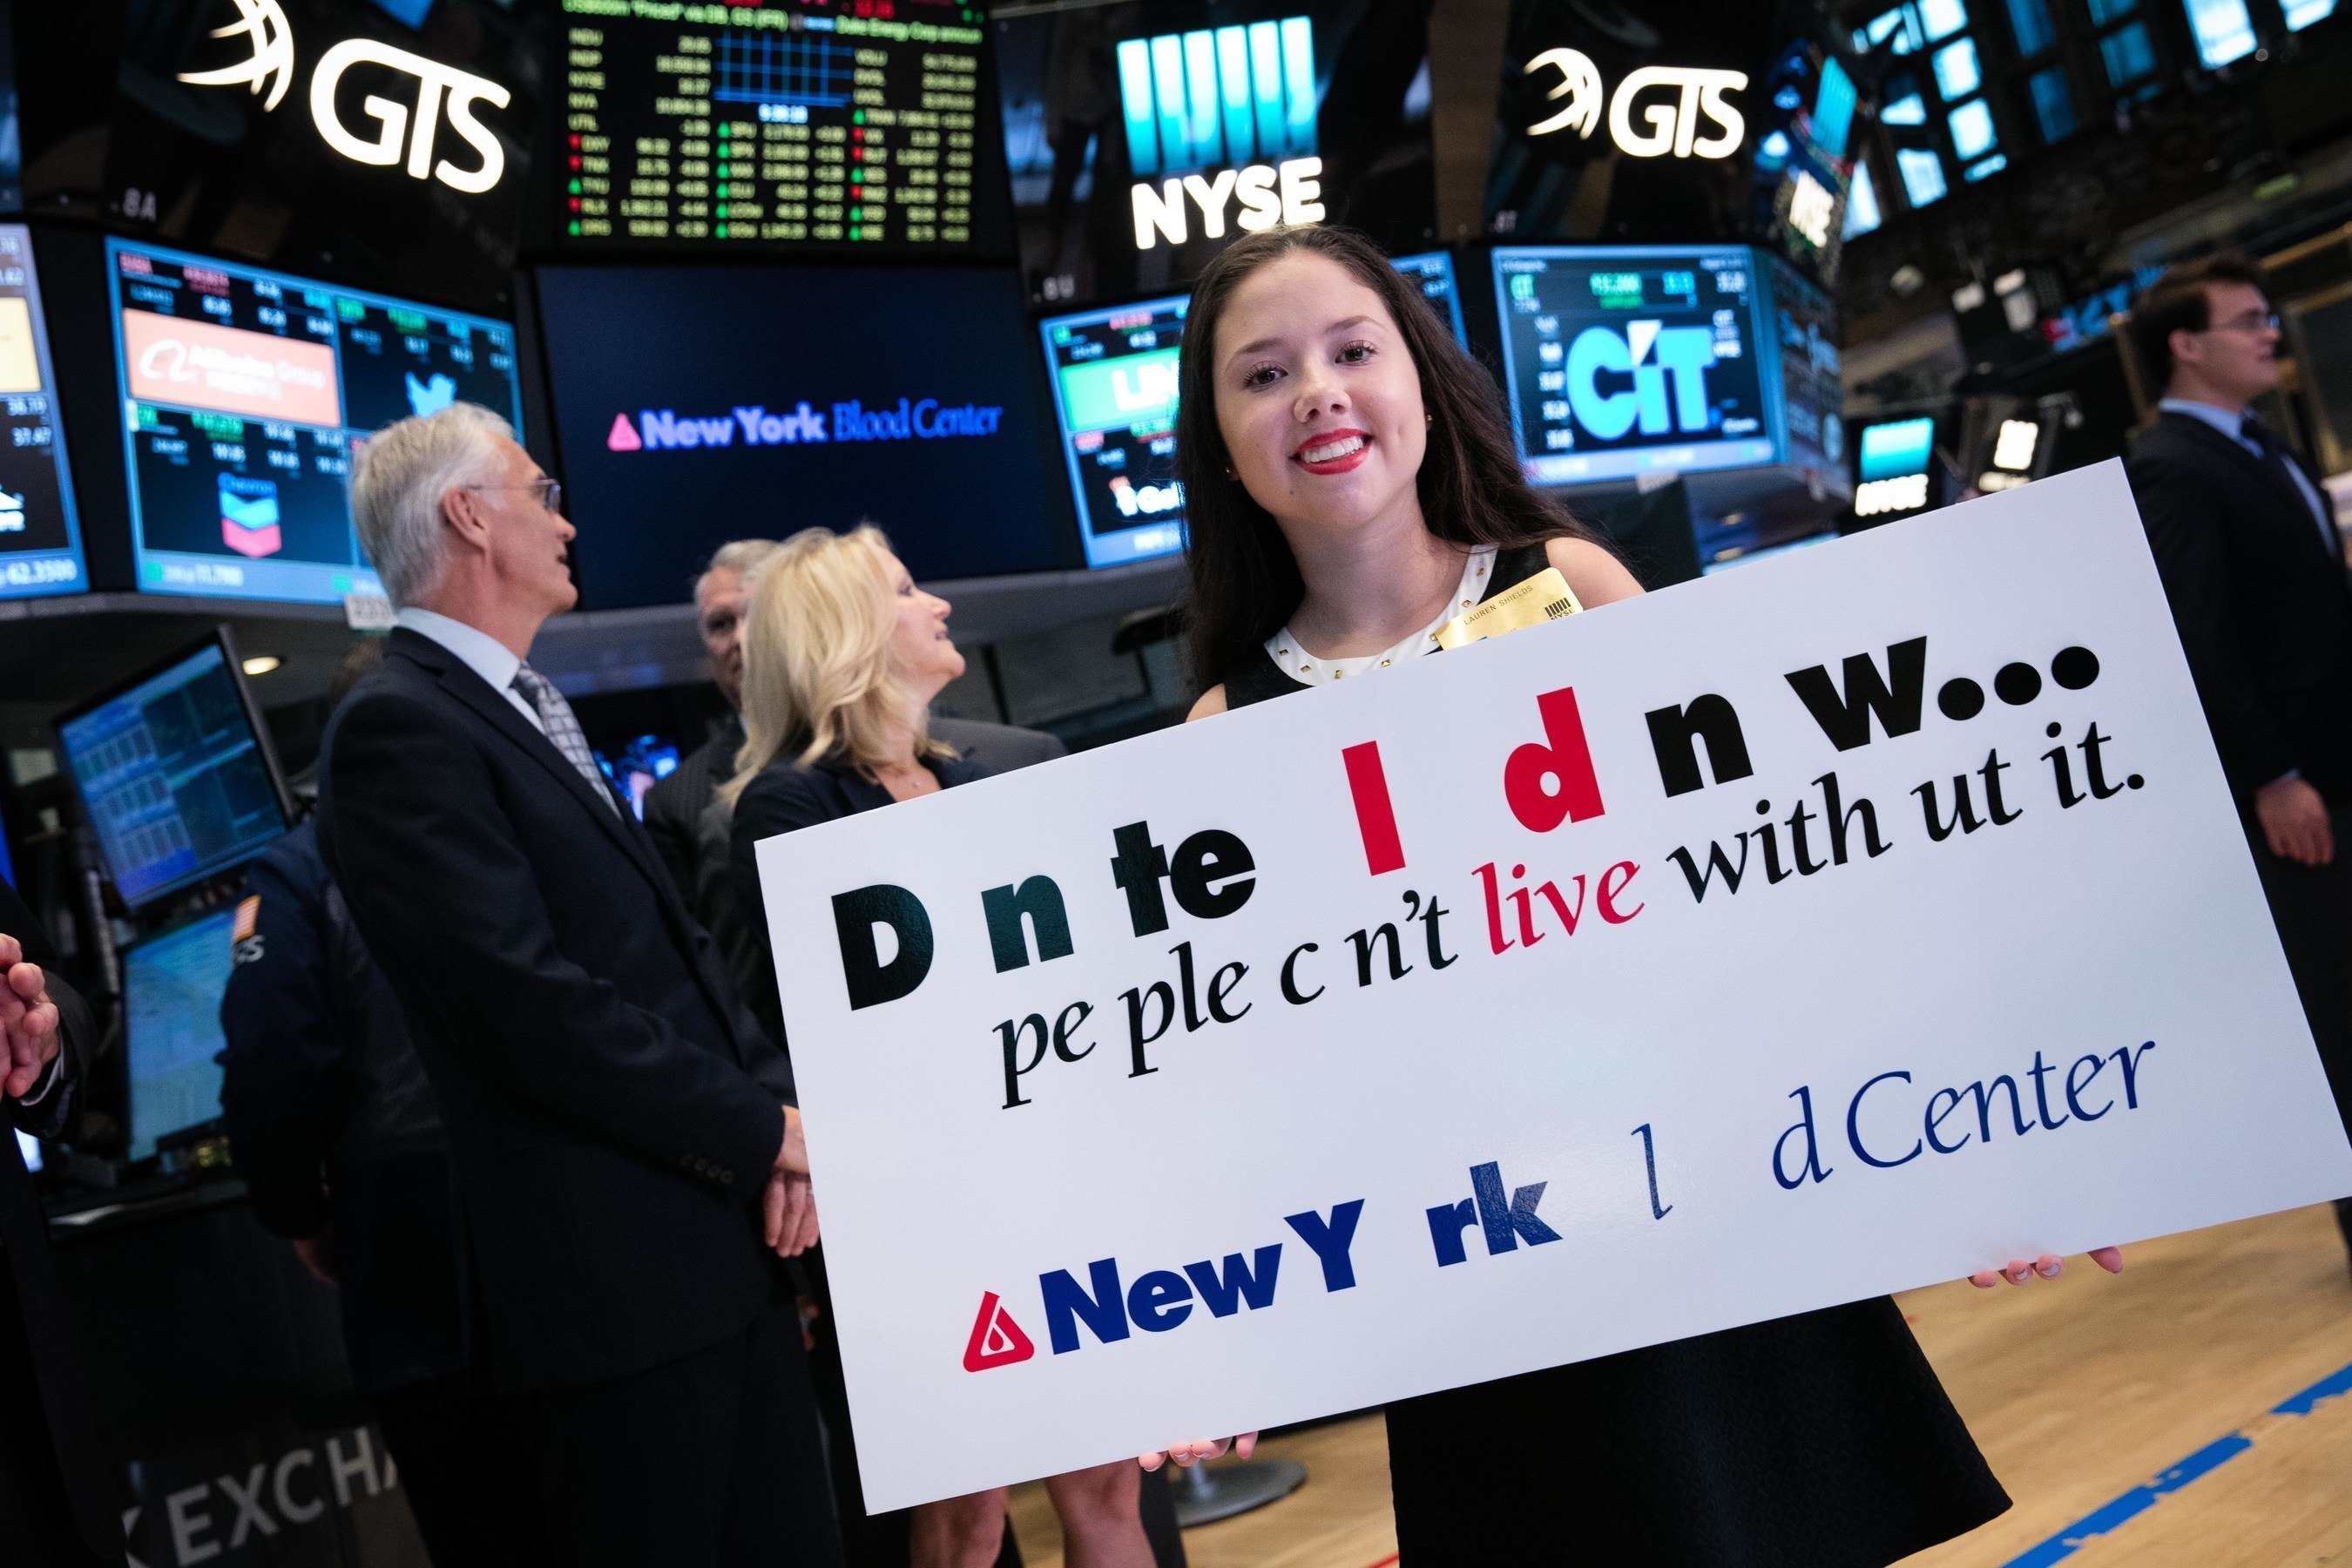 Lauren Shields holds the #MissingType sign during the New York Blood Center's ringing of the opening bell at the New York Stock Exchange on Tuesday, August 9th.